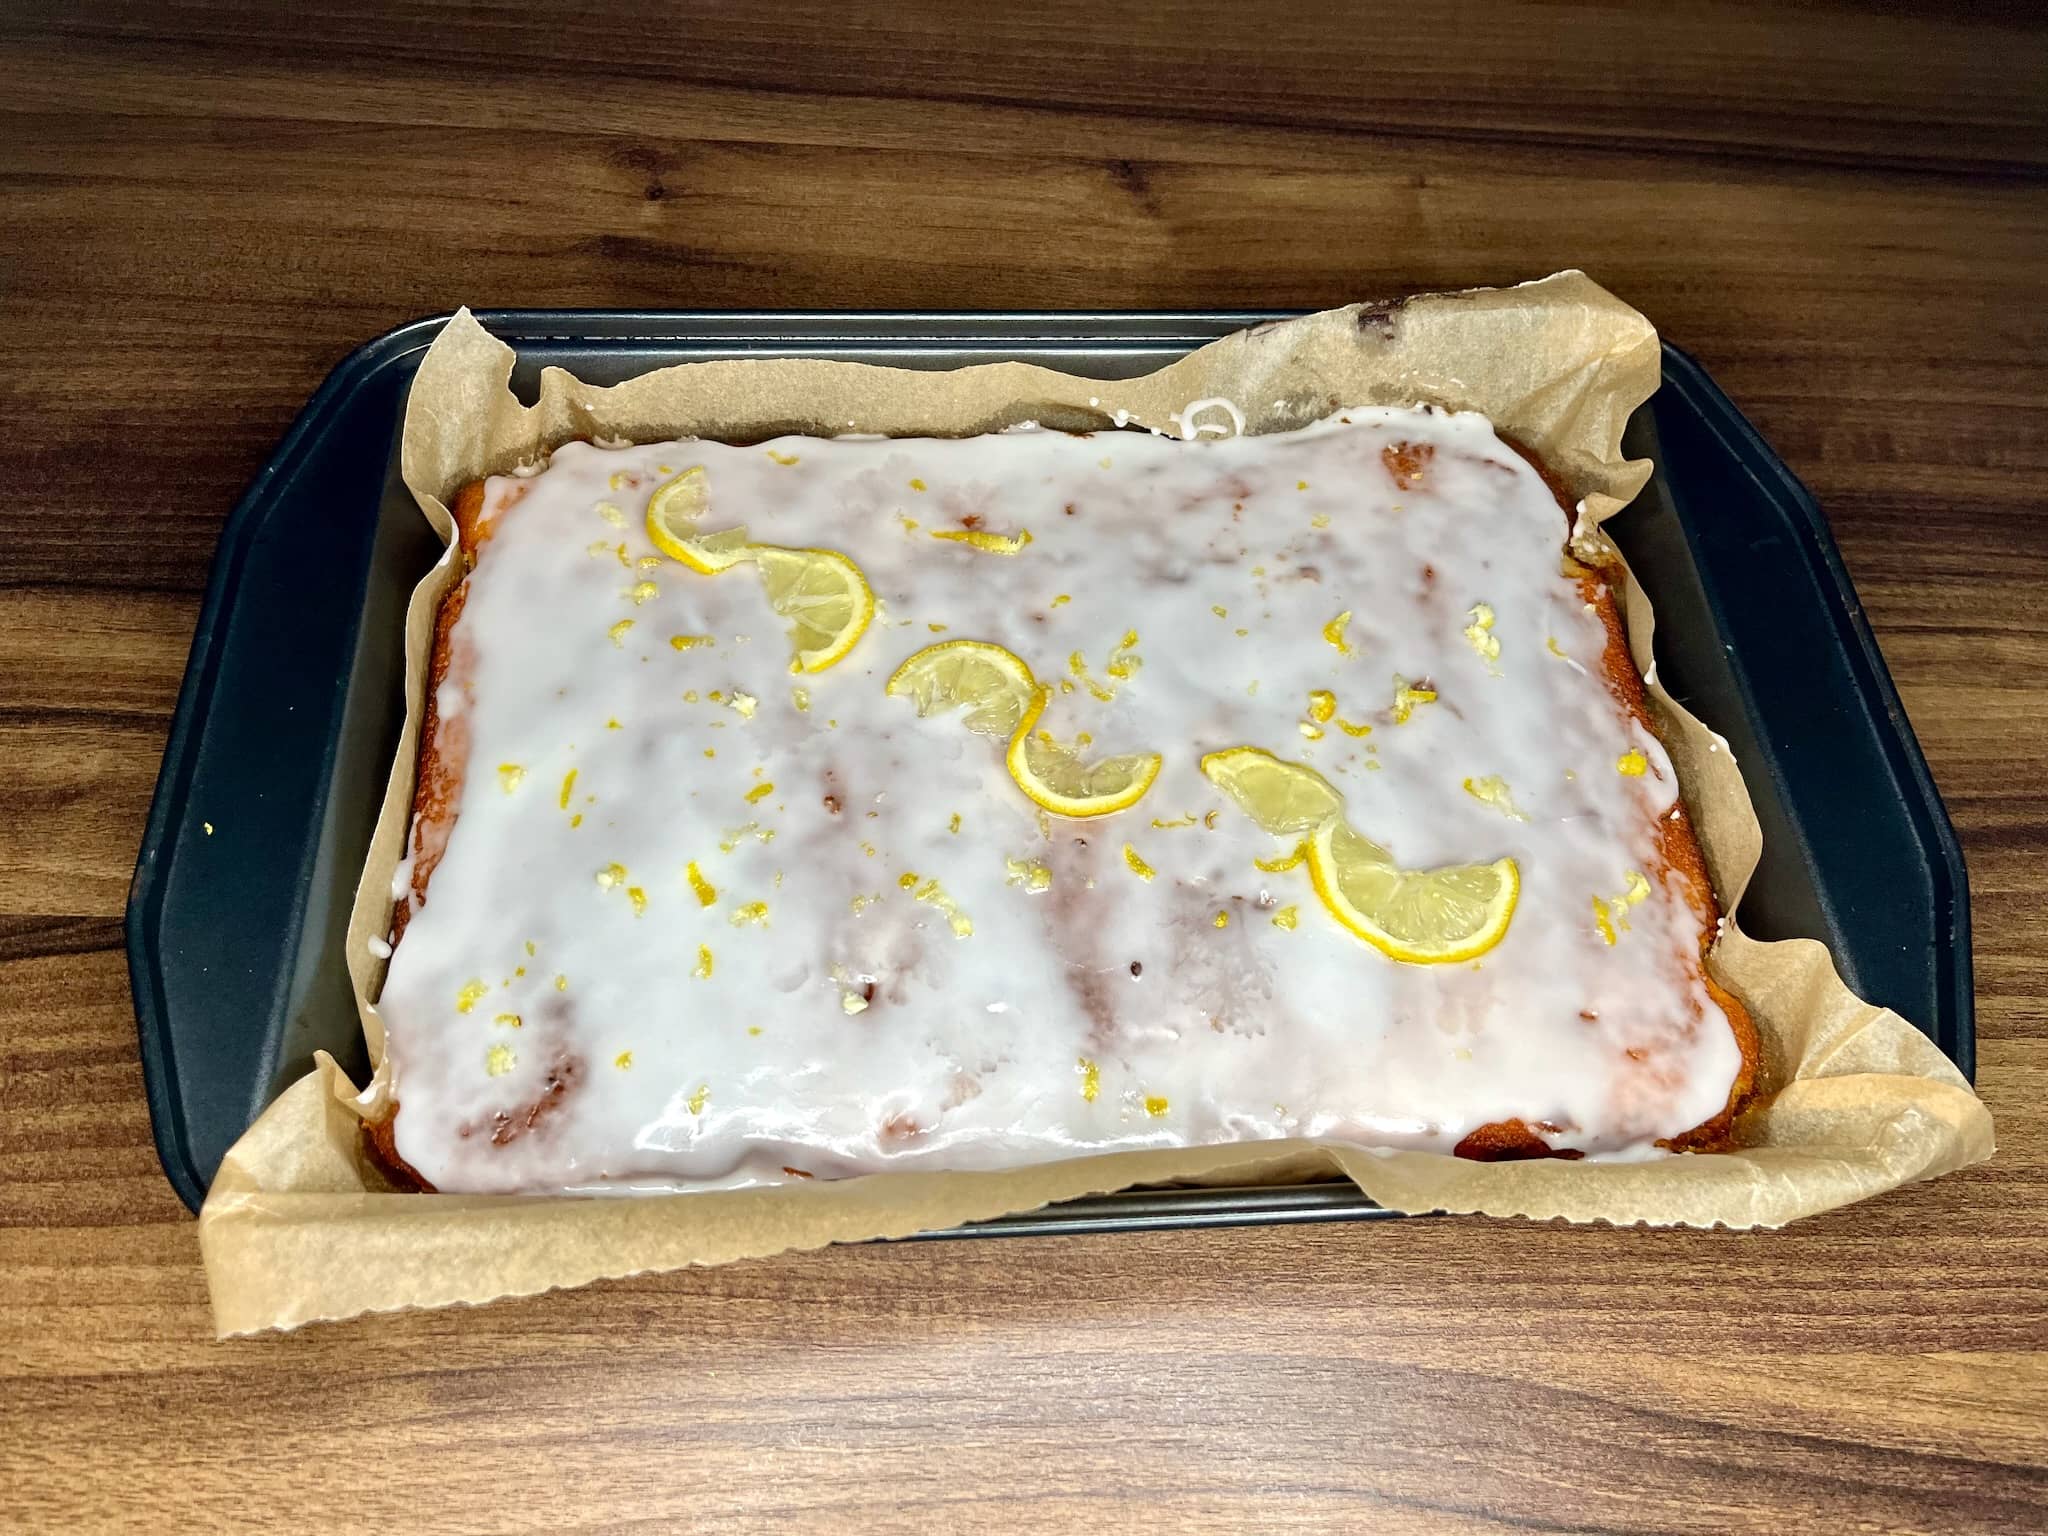 Cake glazed with icing and decorated with lemon zest and lemon slices